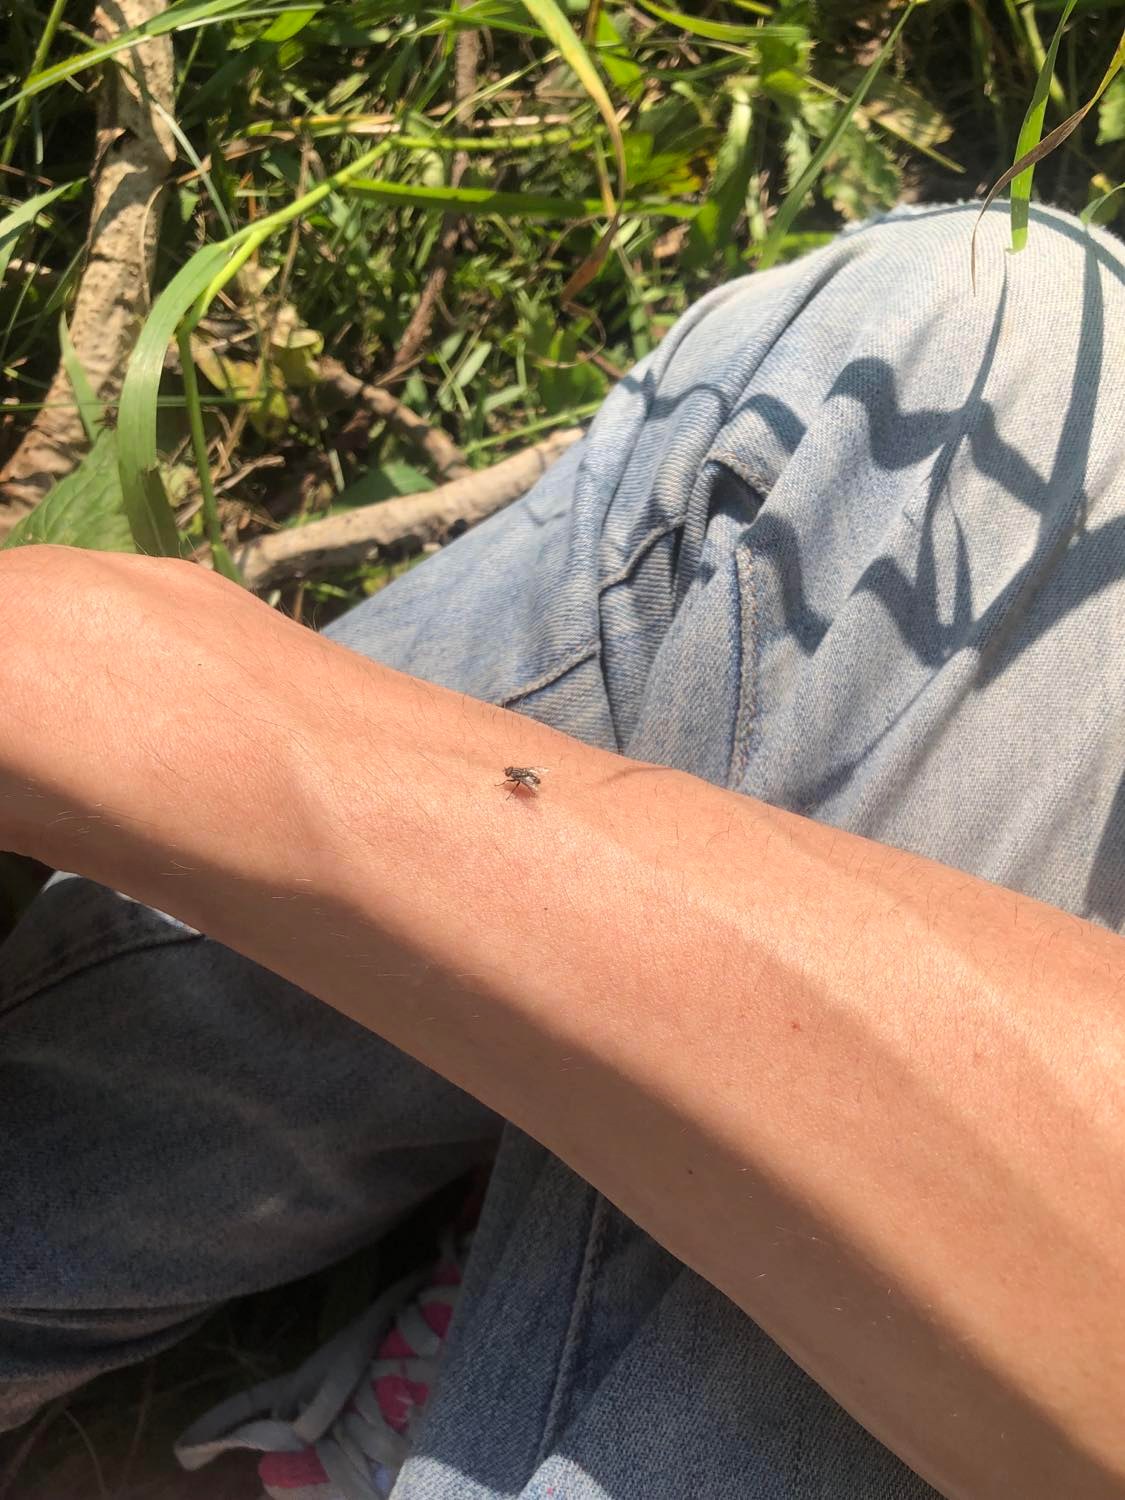 A fly on my arm, in that grassy patch mentioned above.